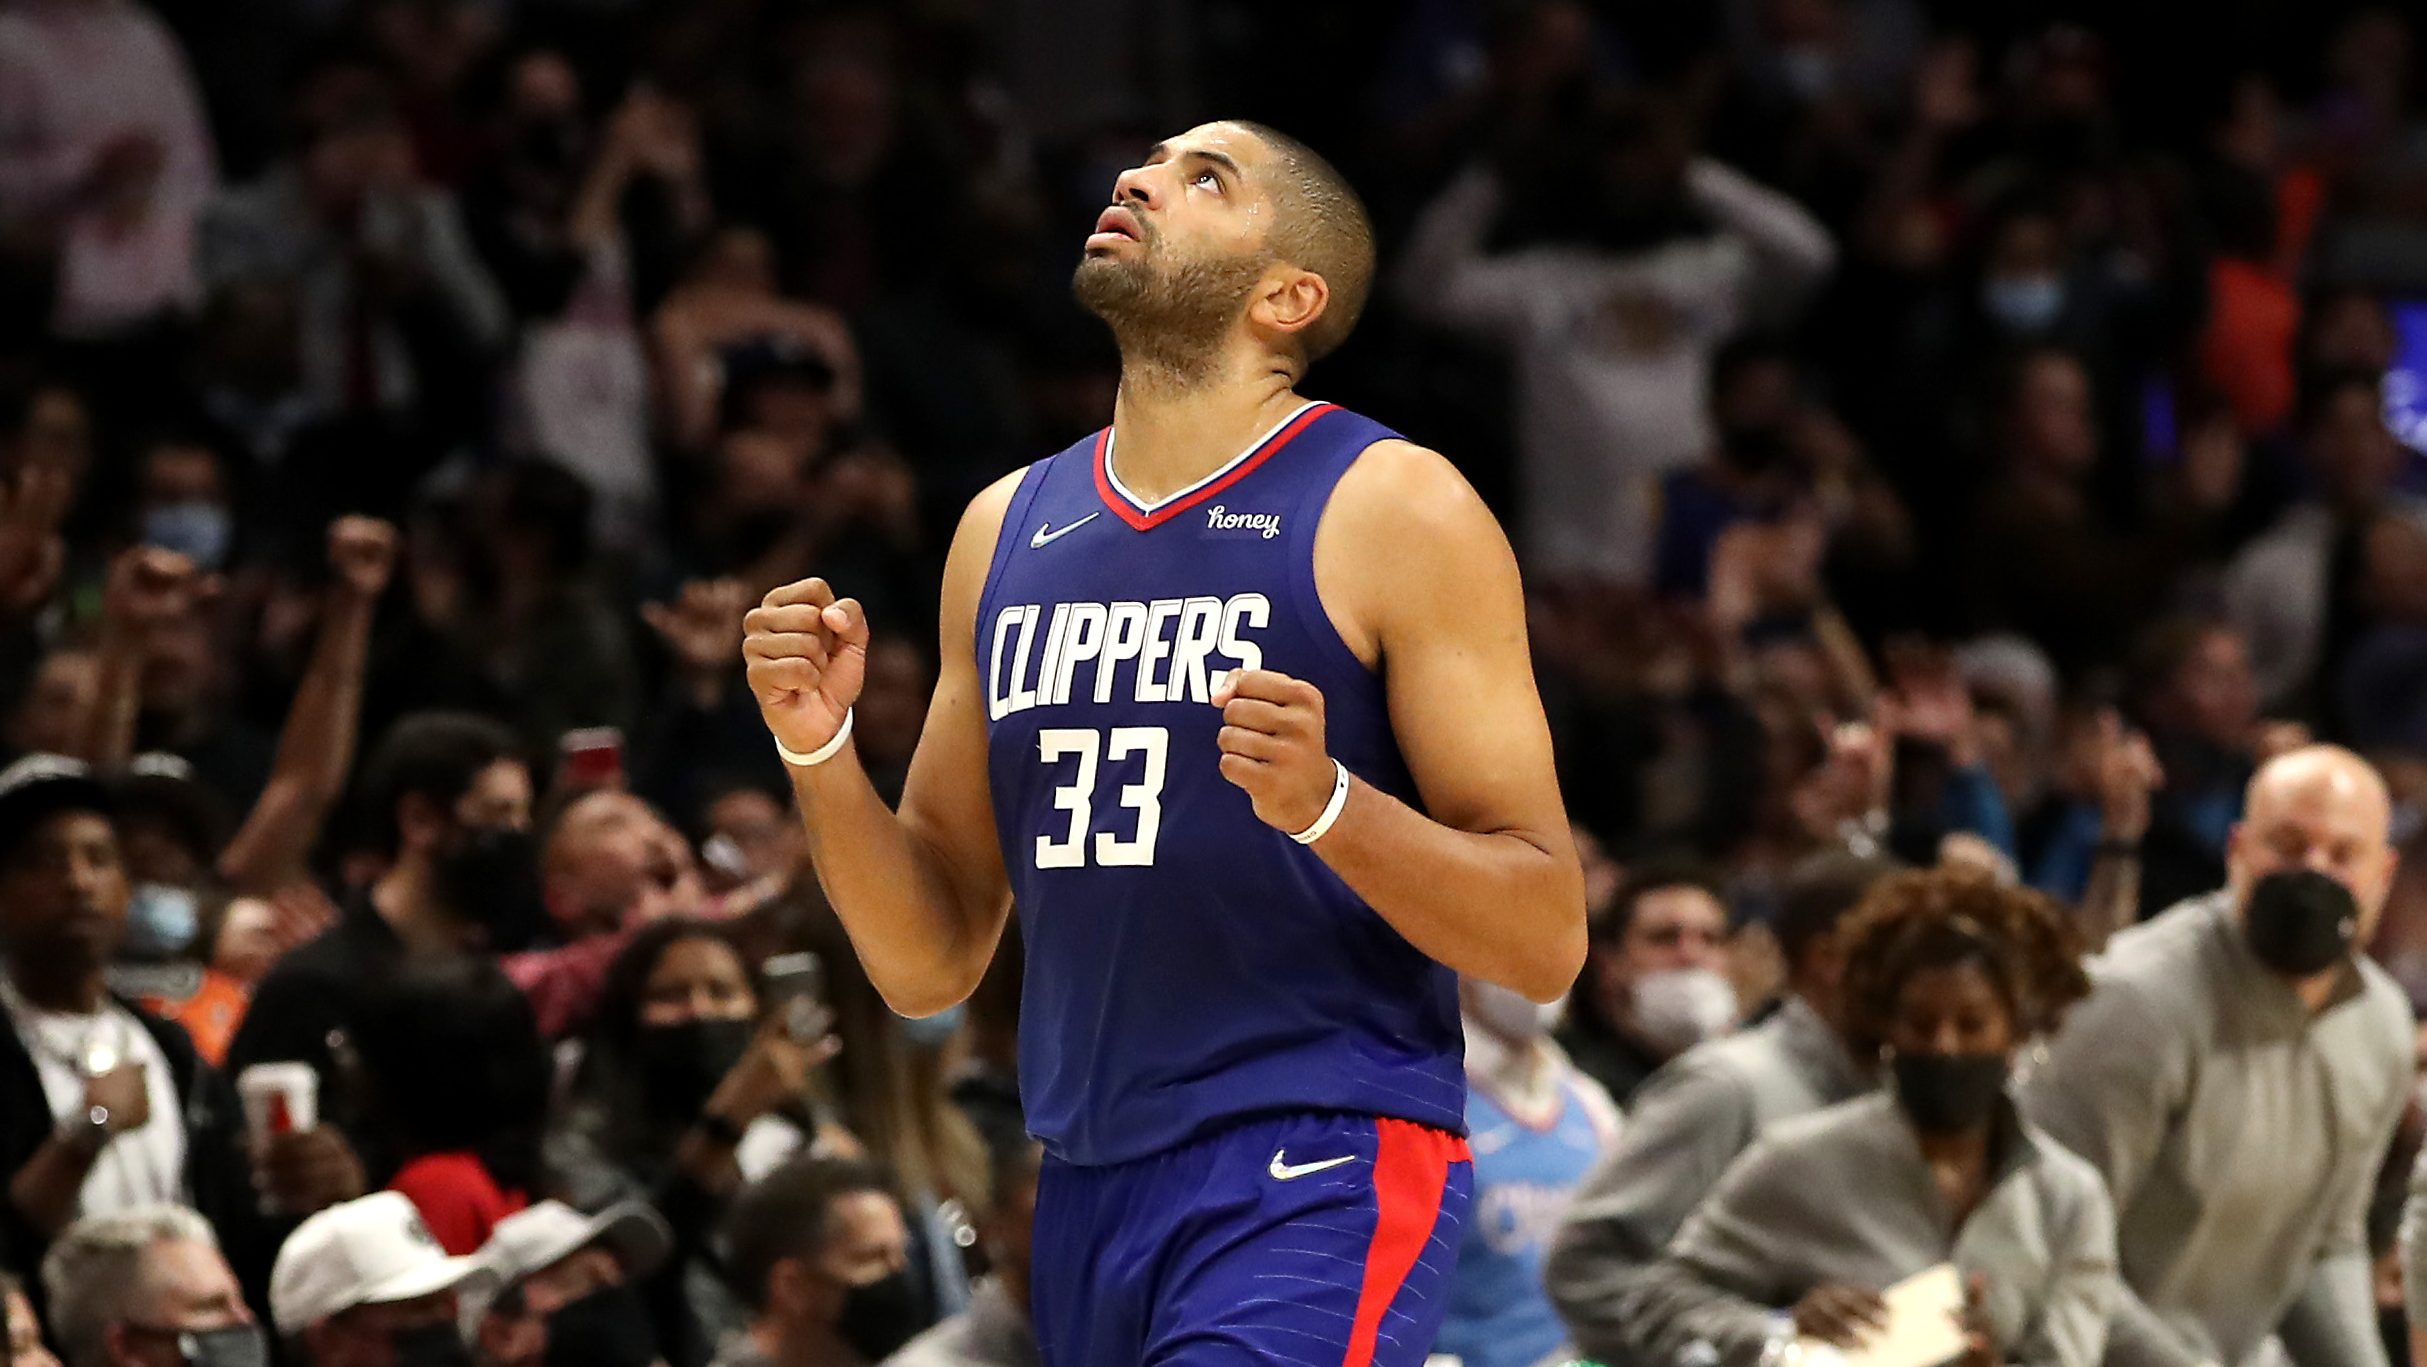 Clippers players that will be free agents in 2022